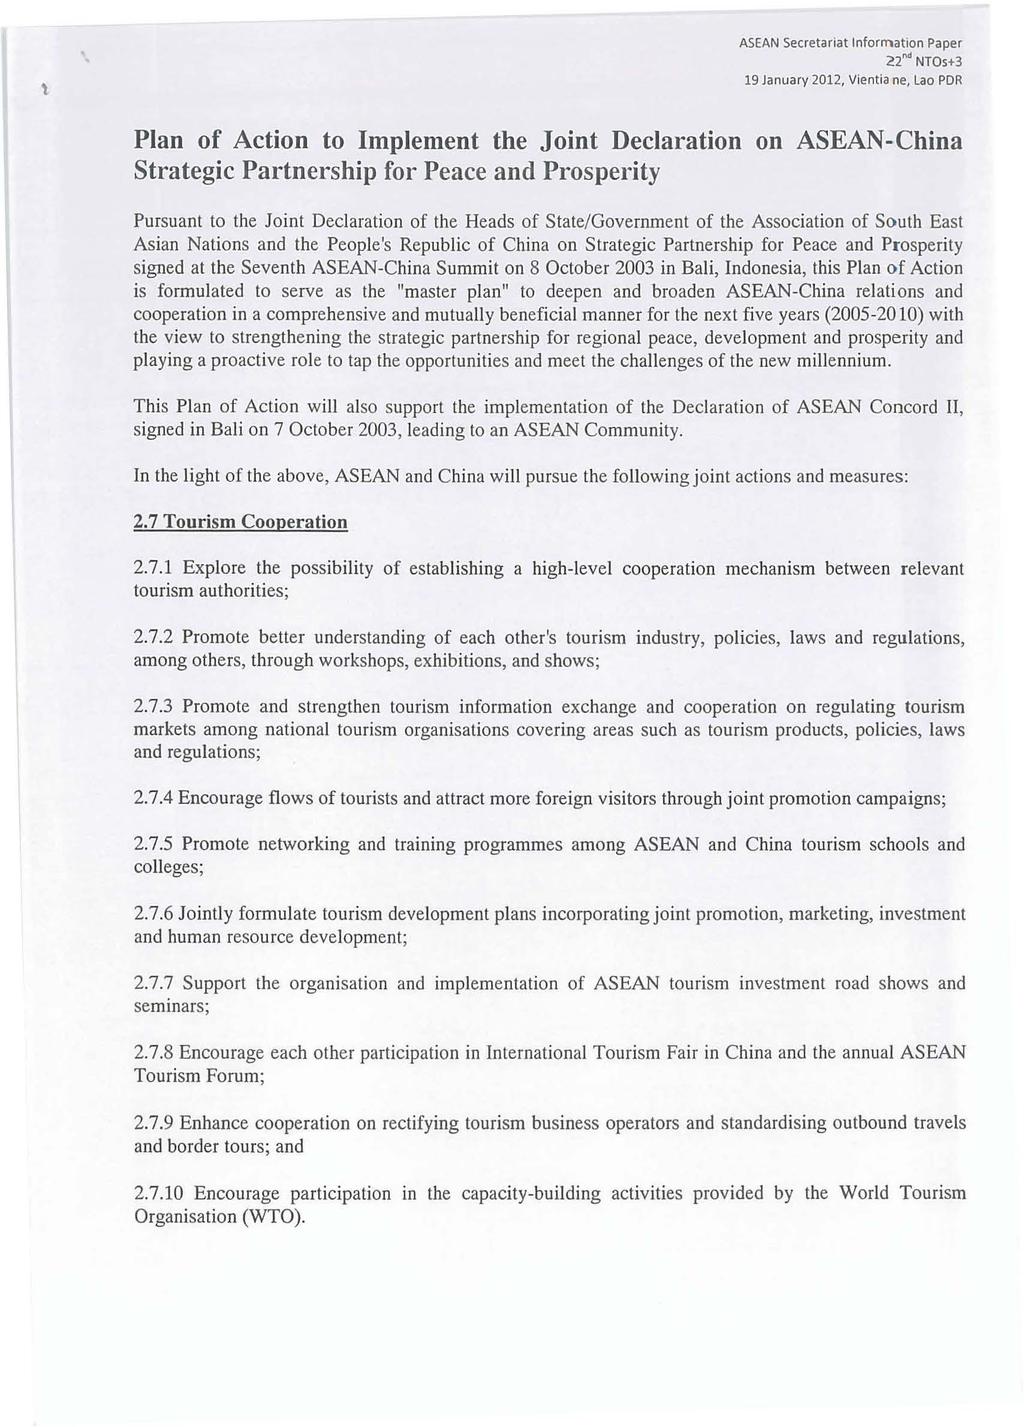 ASEAN Secretanat Information Paper 22"" NTOs+3 19 January 2012, Vientiane, Lao PDR Plan of Action to Implentent the Joint Declaration on ASEAN-China Strategic Partnership for Peace and Prosperity